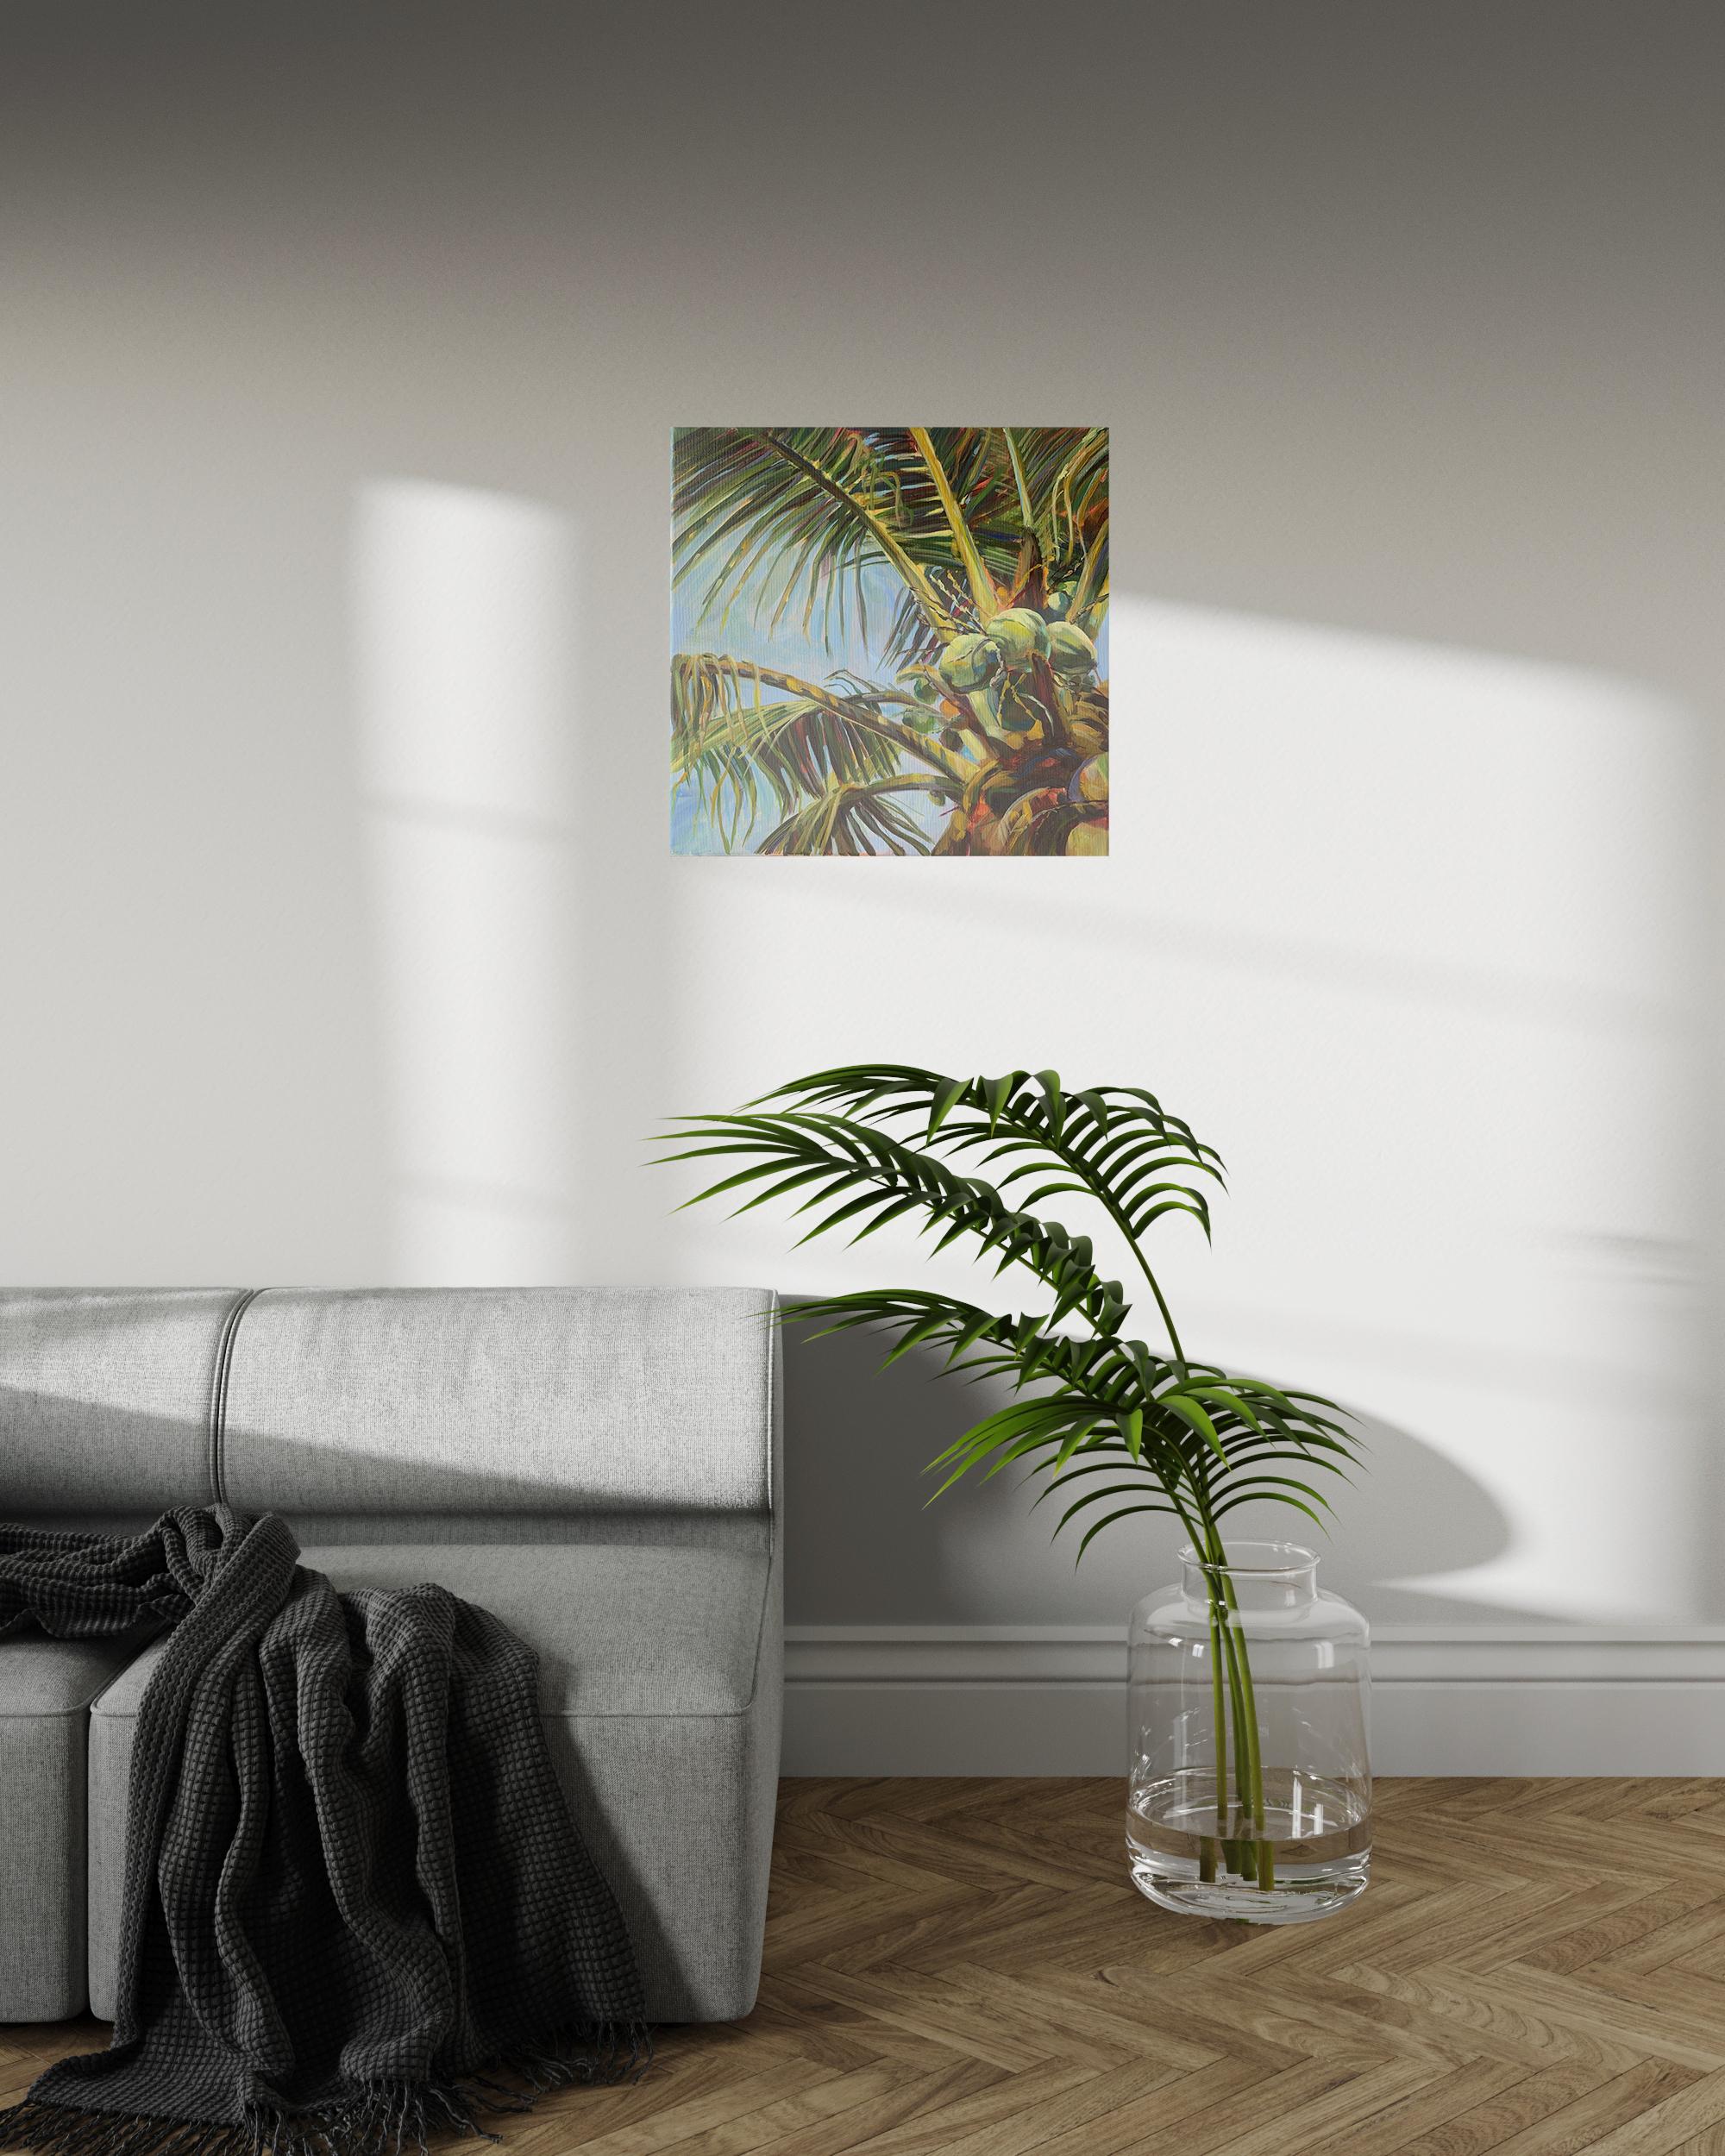 Original oil painting with positive mood. This painting was inspired by nature of tropical garden in sunny days. 
Bright illumination from the sun on a coconut tree, palm trees evoke memories of a vacation in the tropics. Every plant is especially